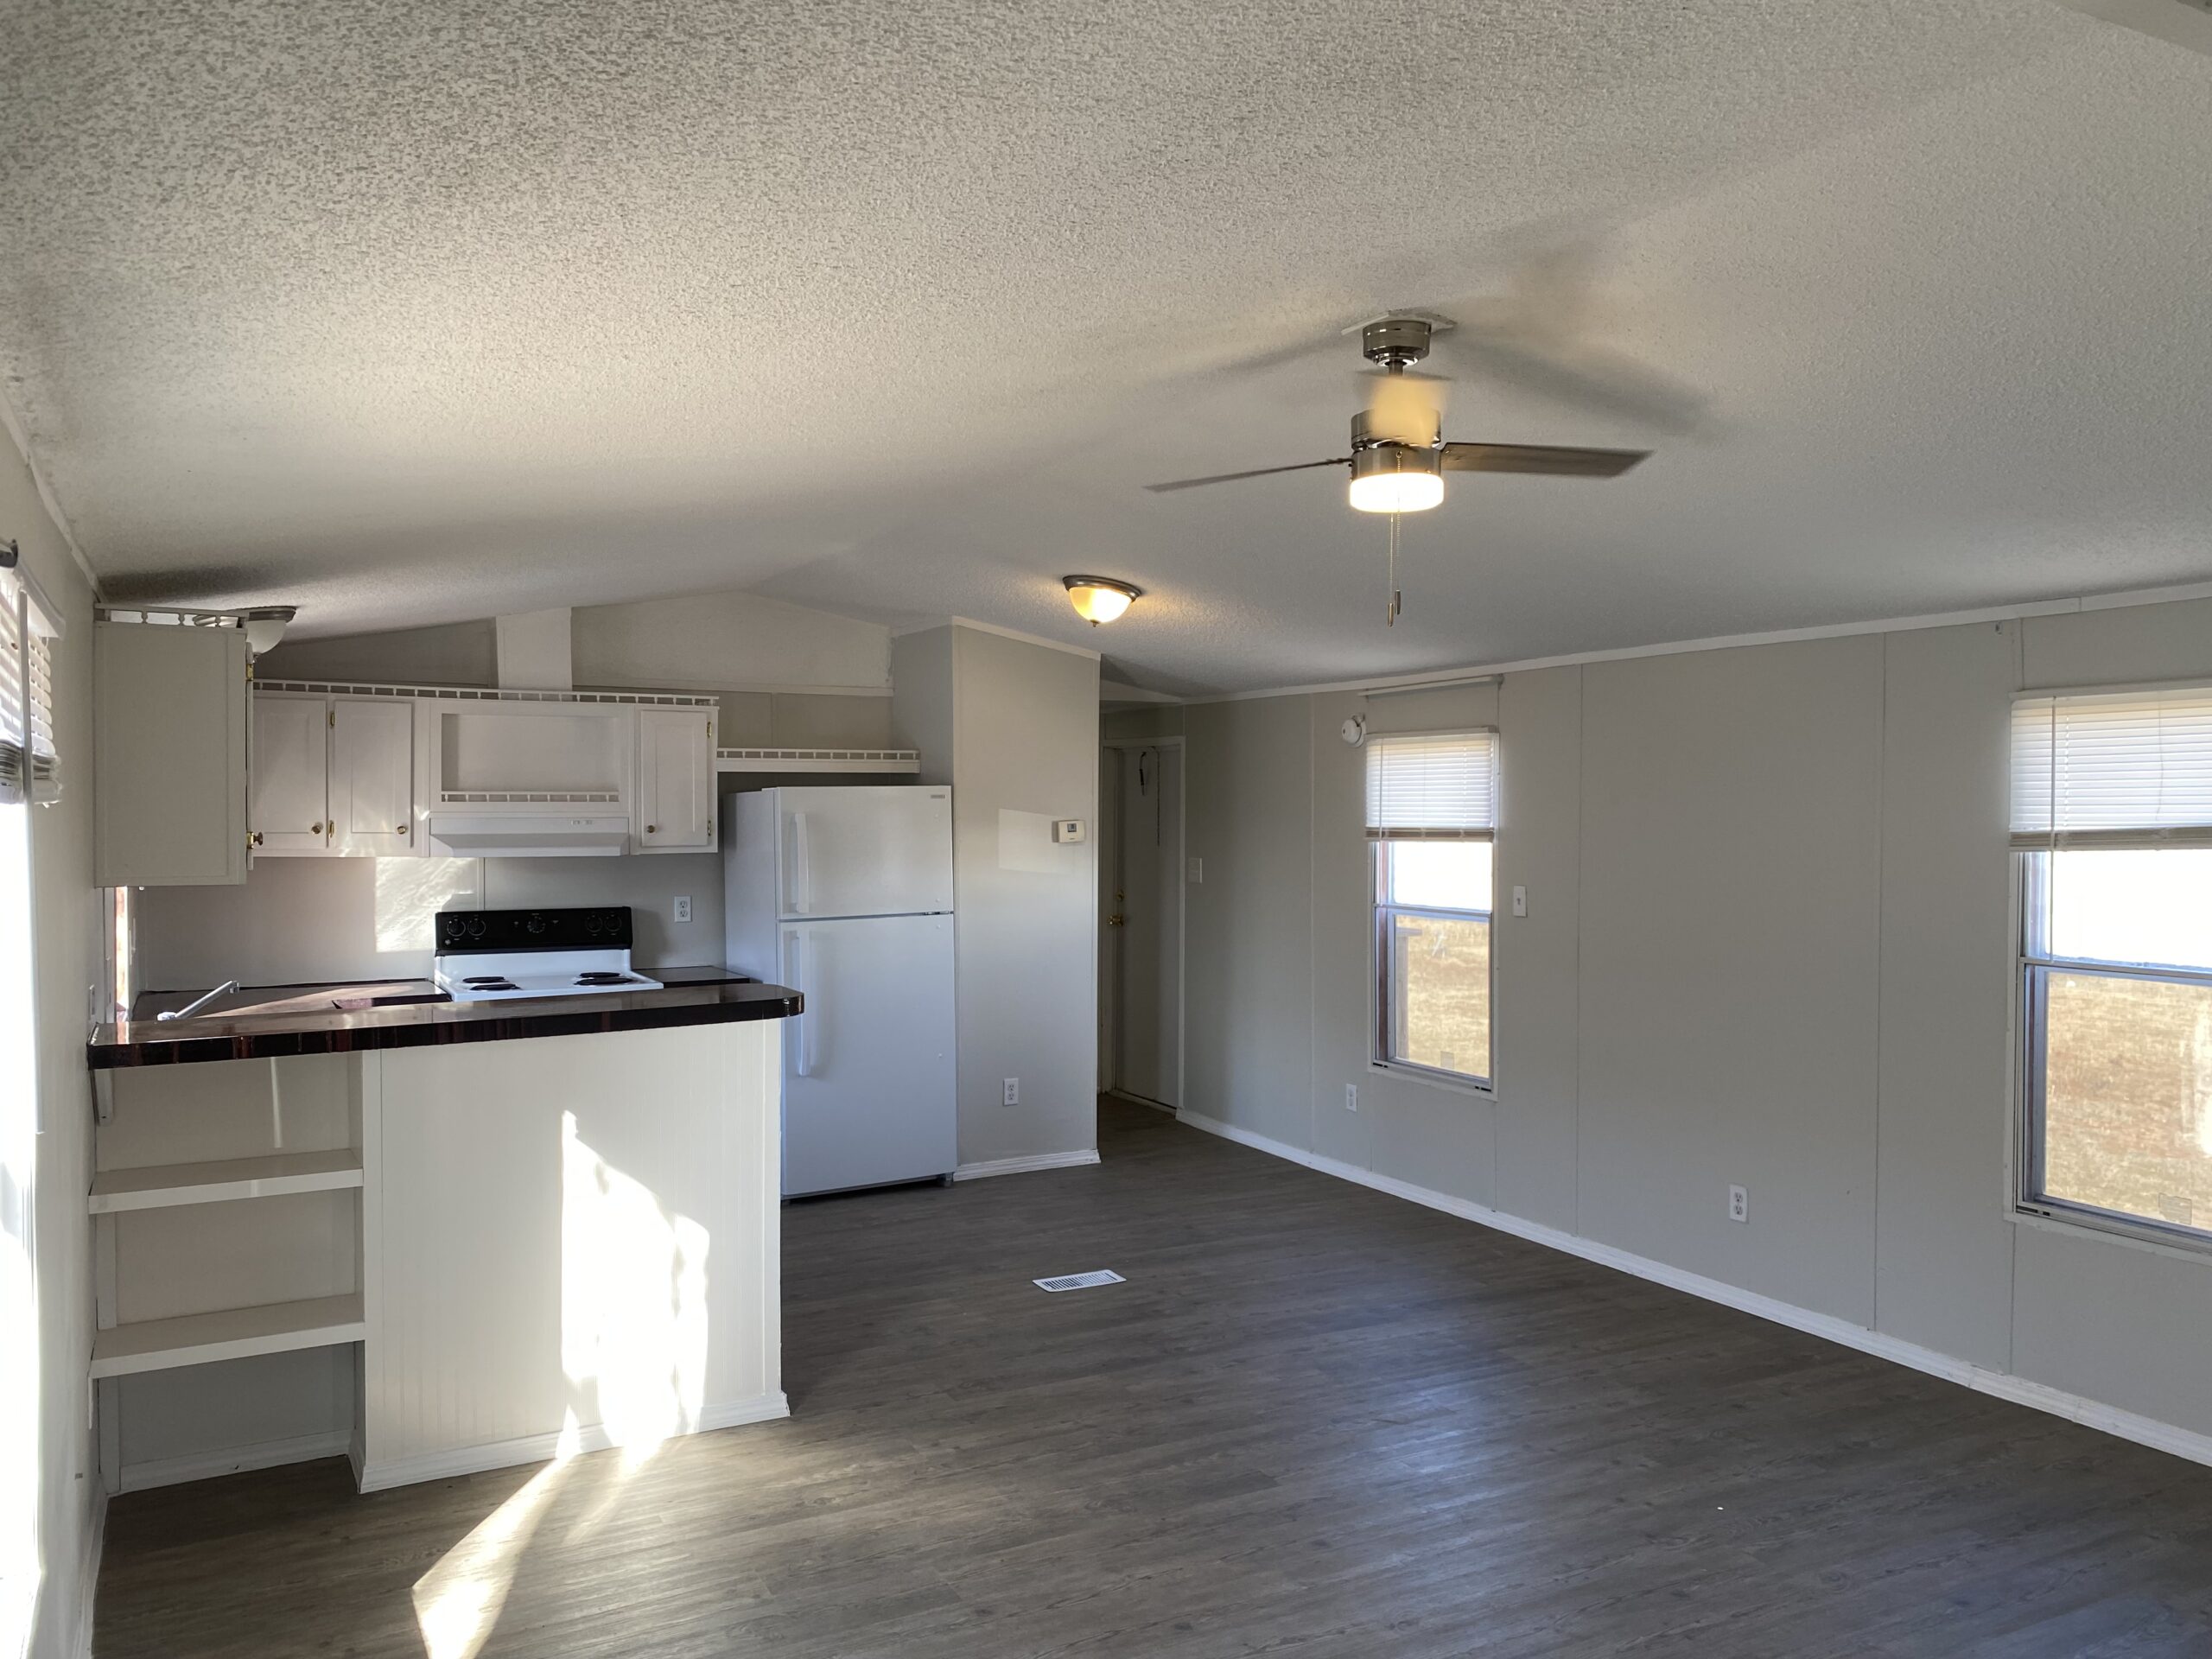 CENTRALLY LOCATED & AFFORDABLE LIVING!